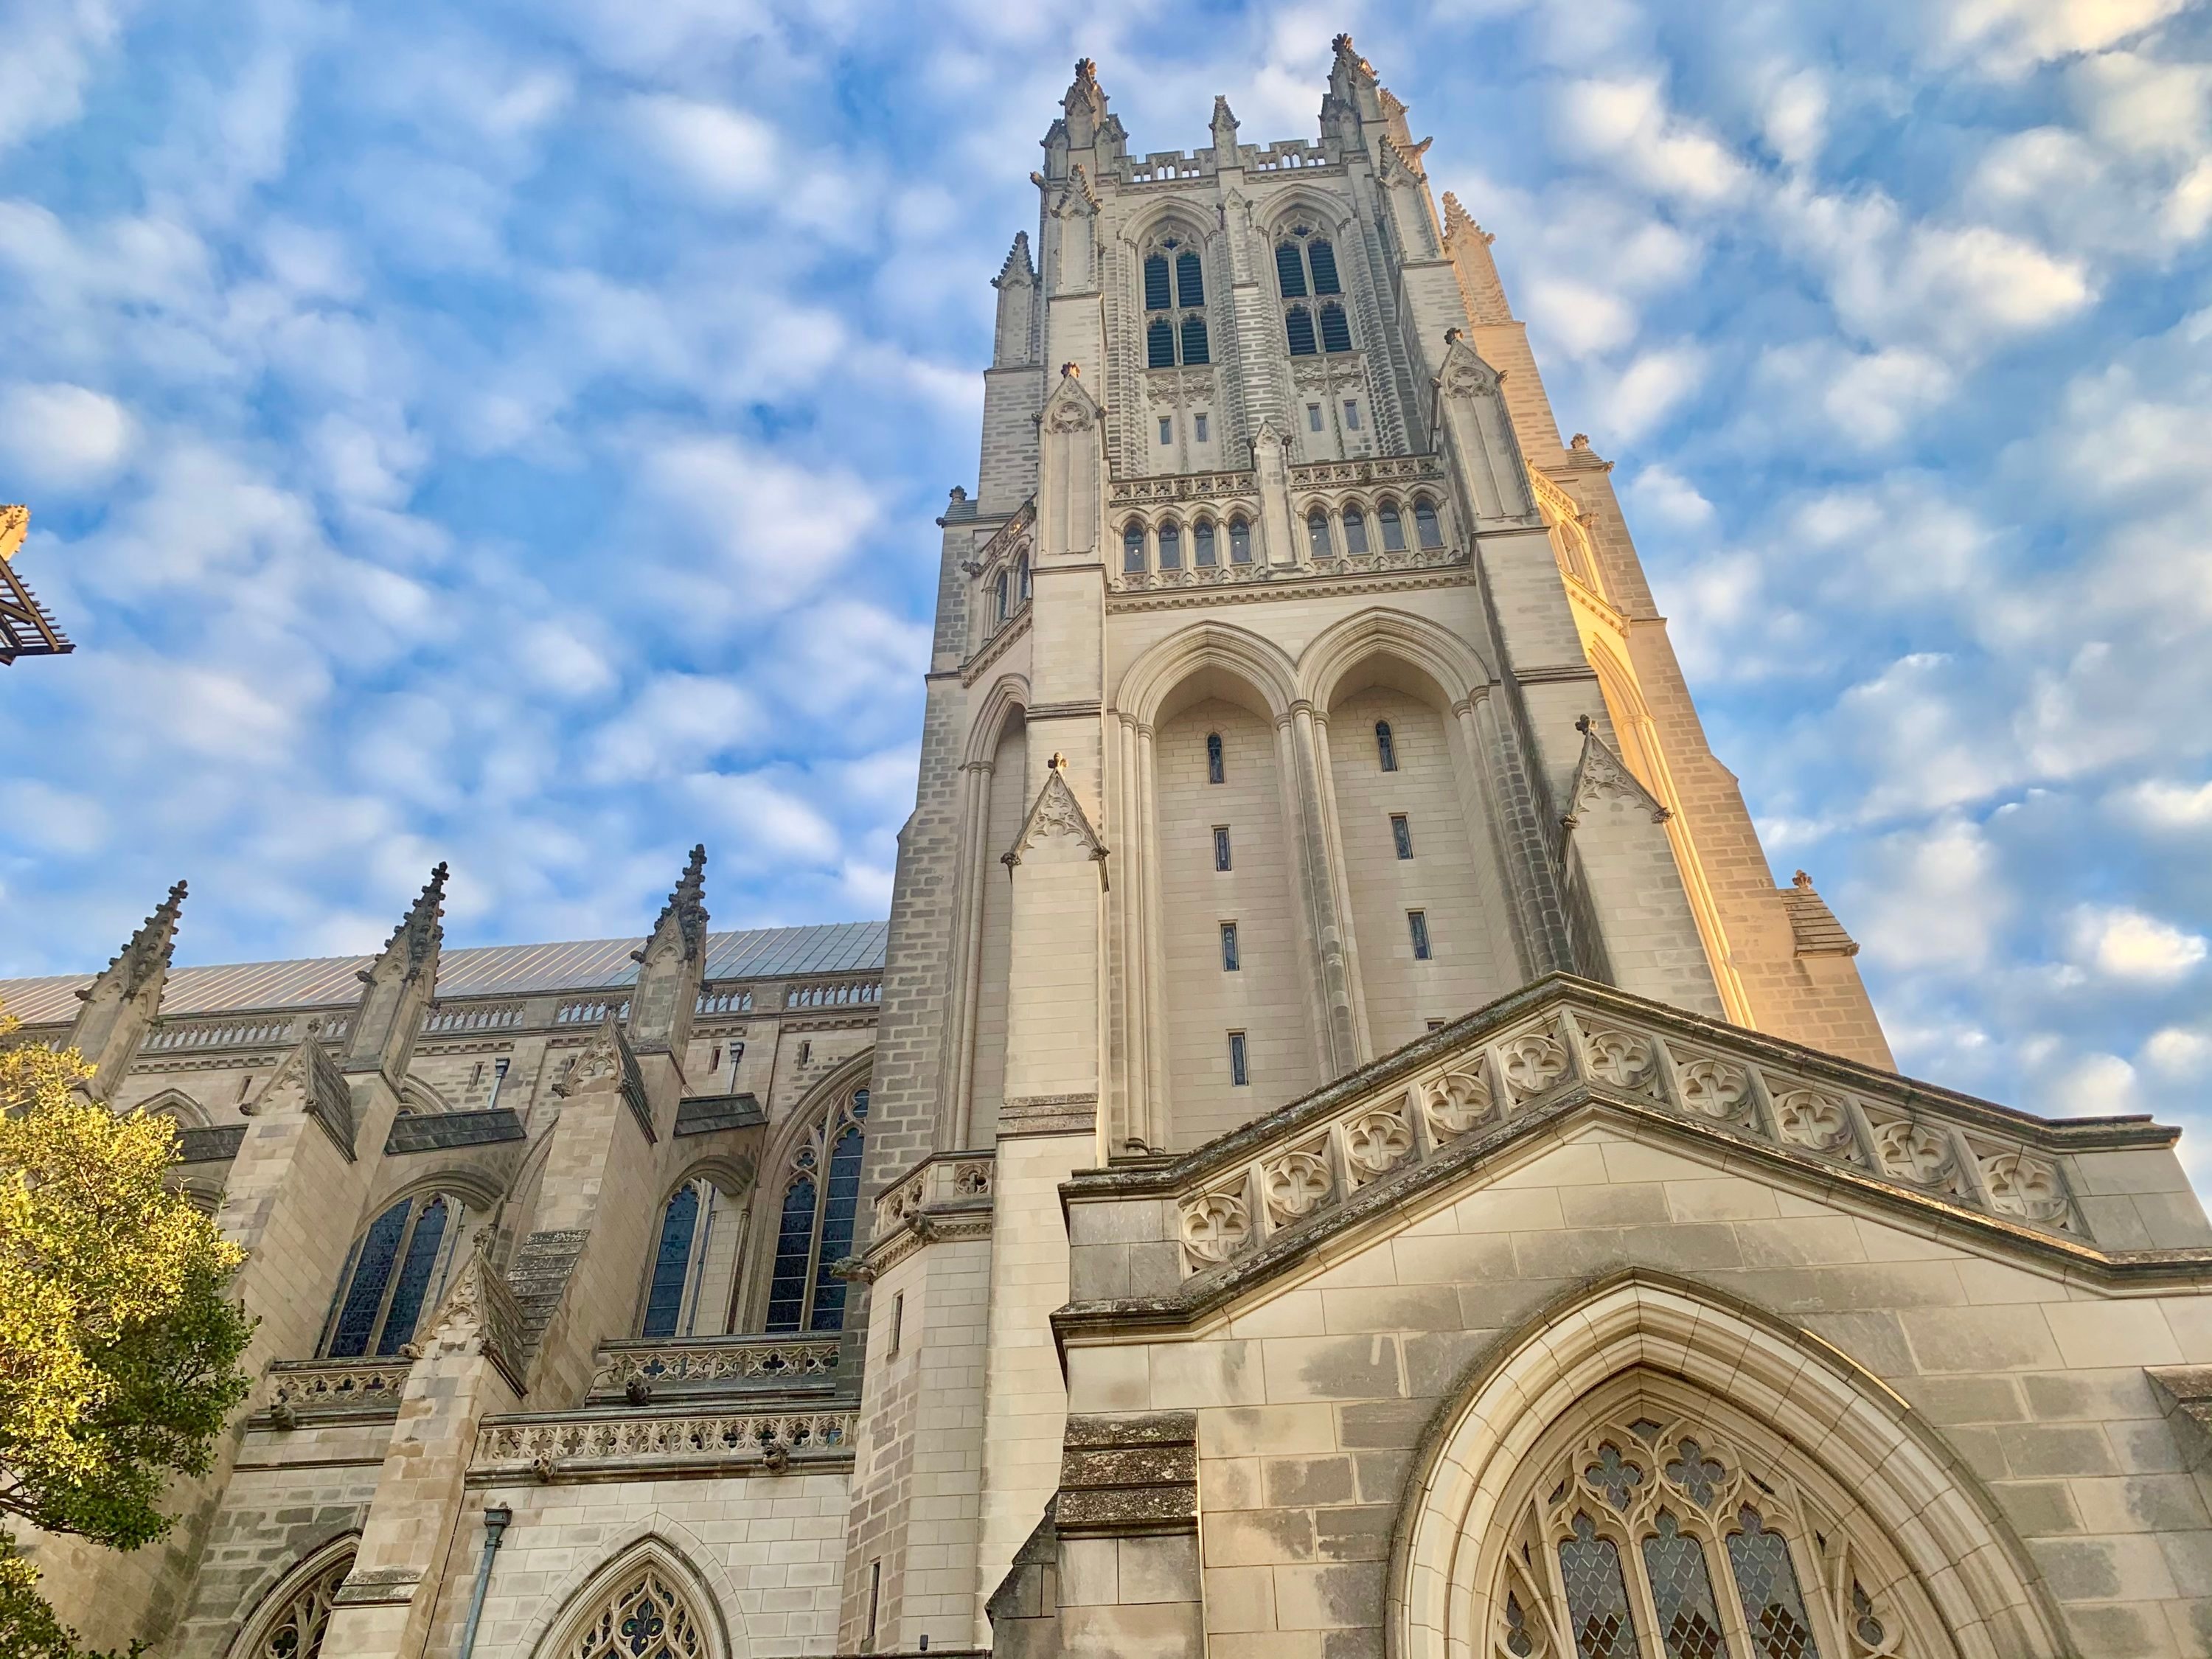 See Washington National Cathedral's New Racial Justice-Themed